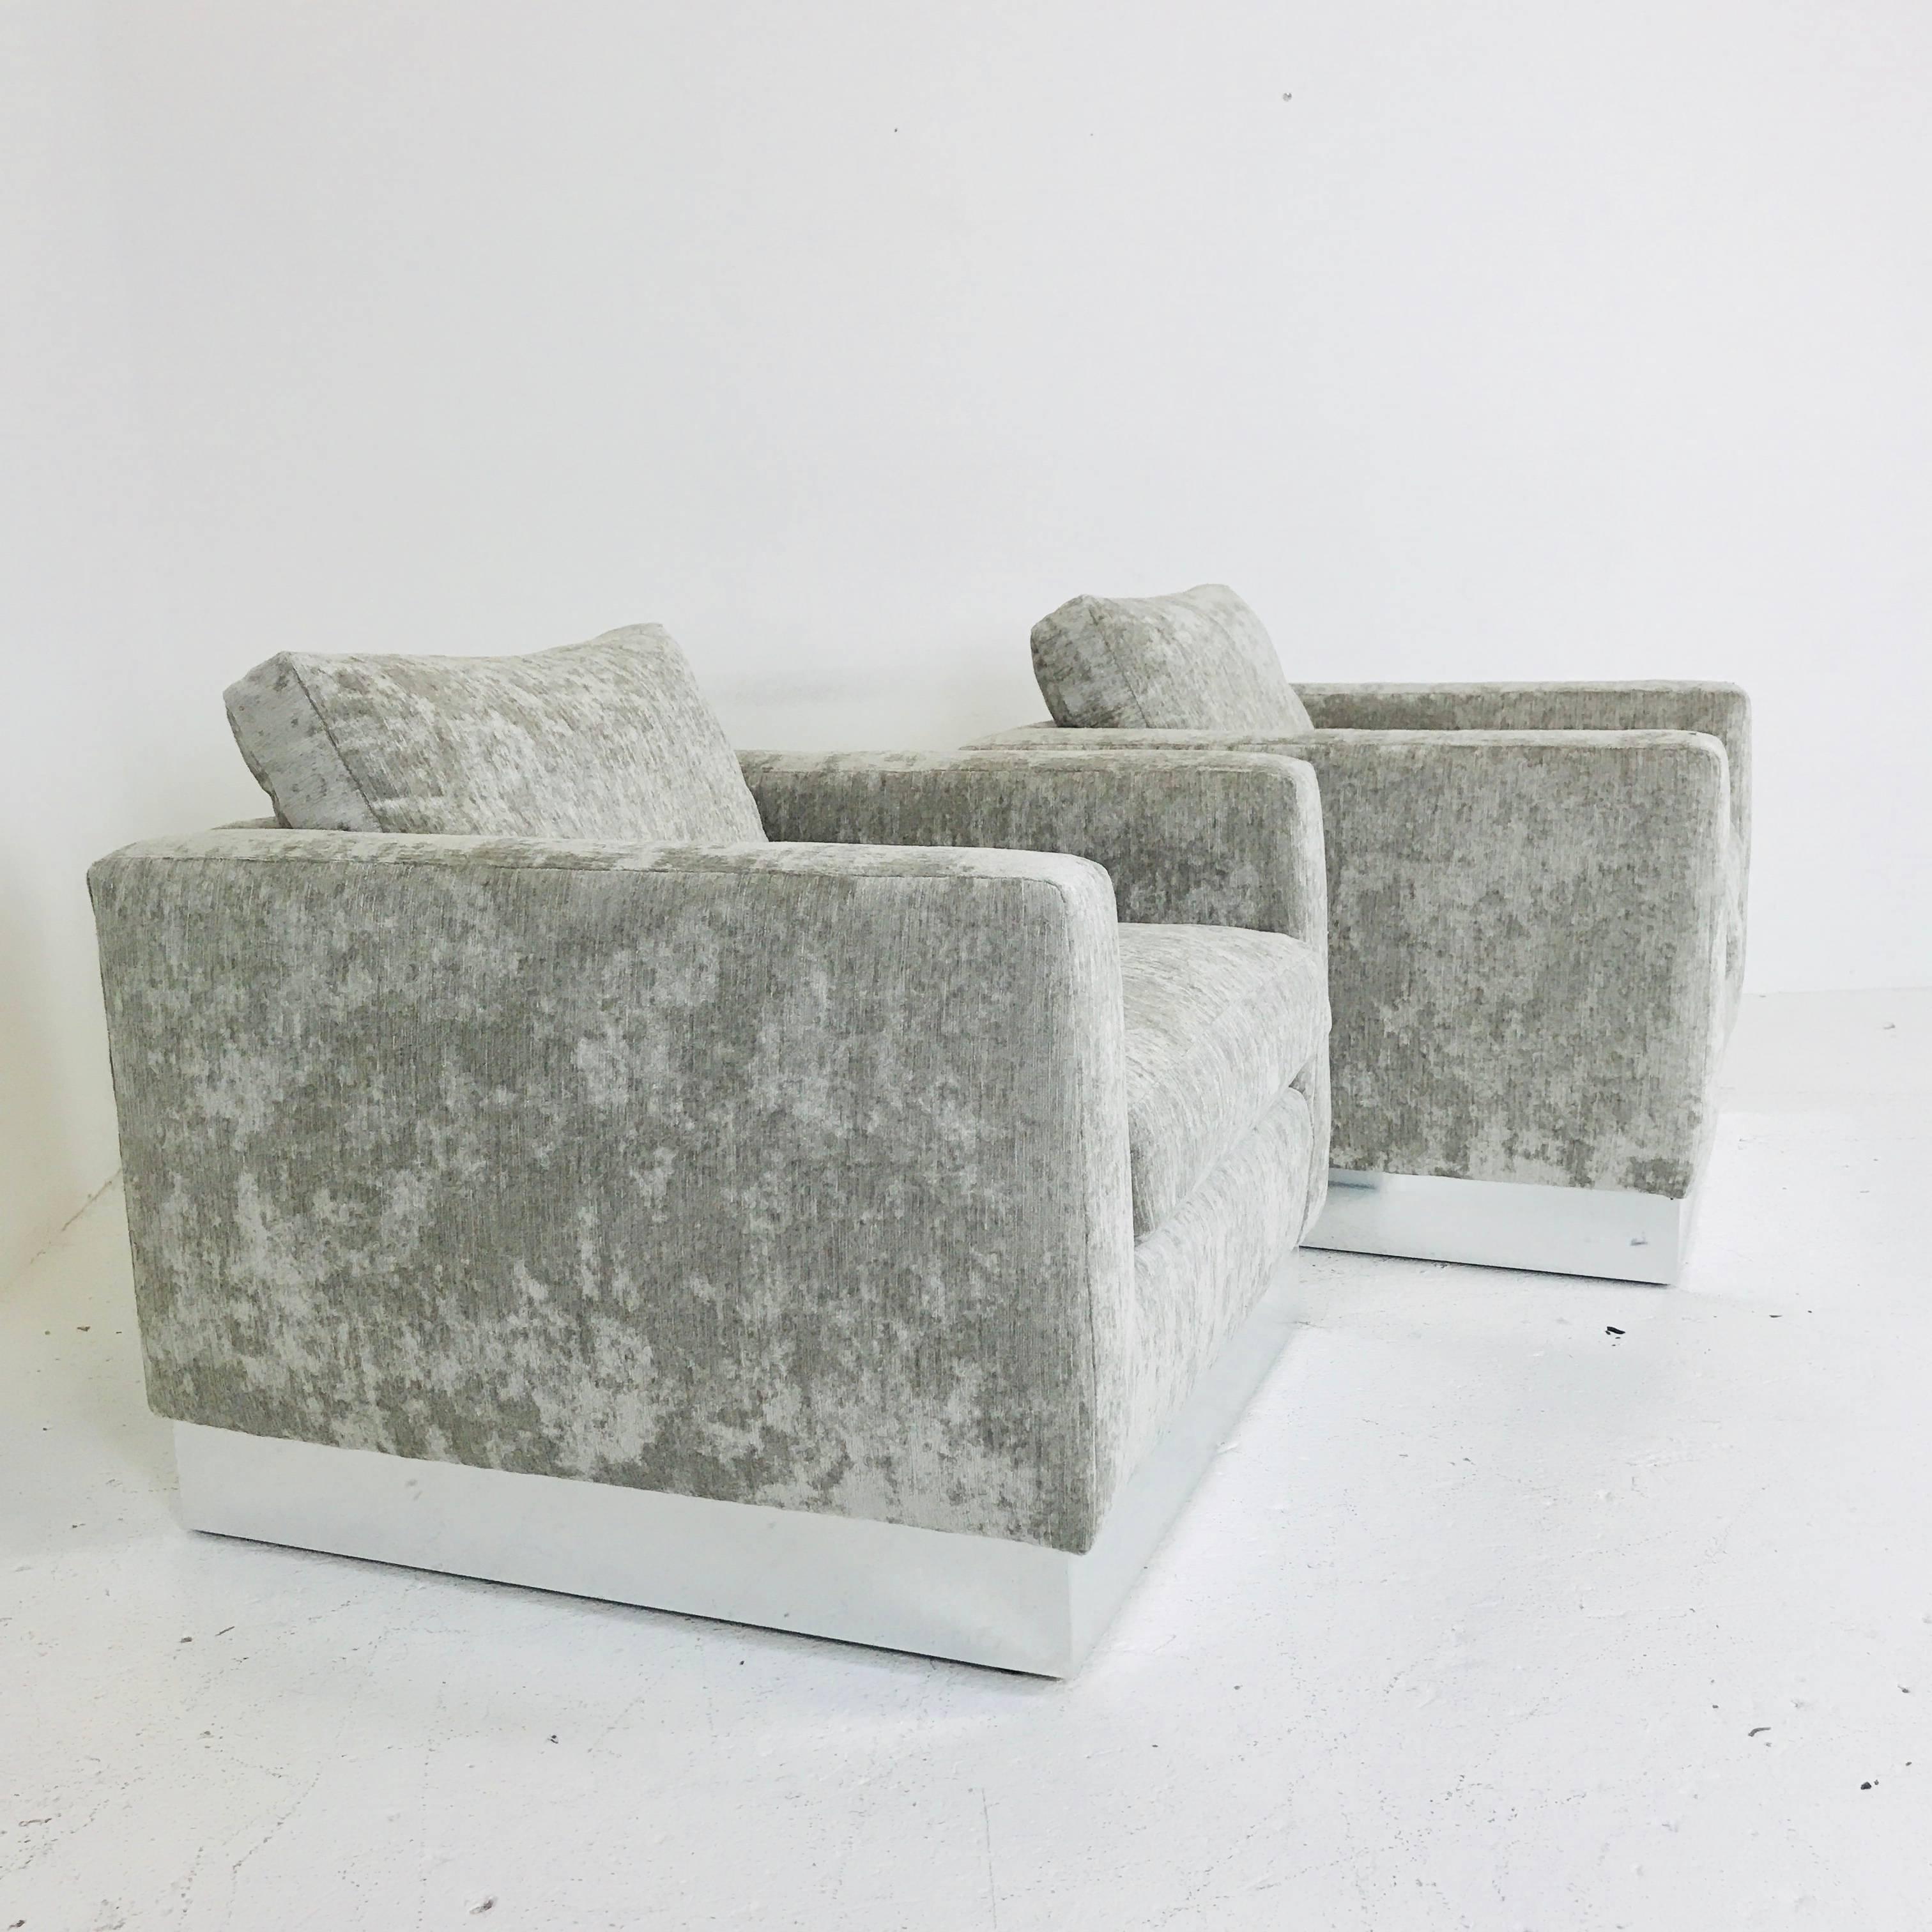 Pair of Milo Baughman cube chairs with plinth base. Newly Upholstered.

Dimensions: 31